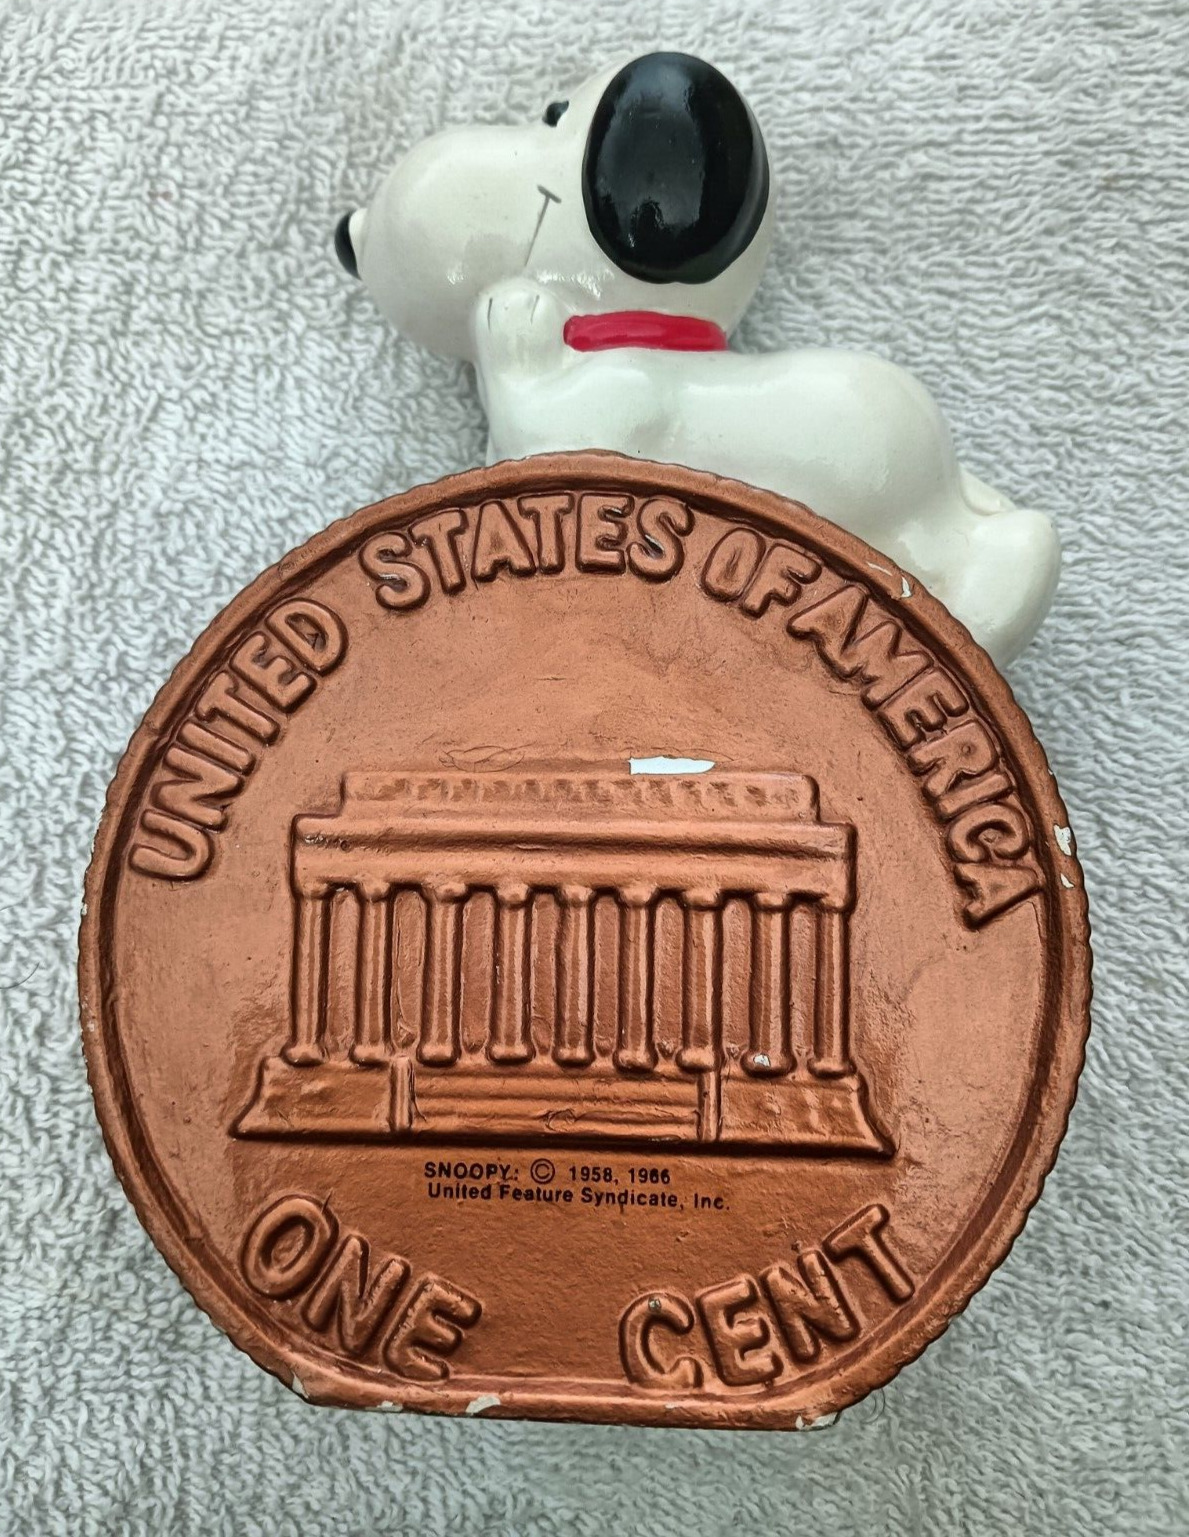 Vintage 1966 Peanuts Snoopy Penny Bank Rare United Feature Syndicate Inc.